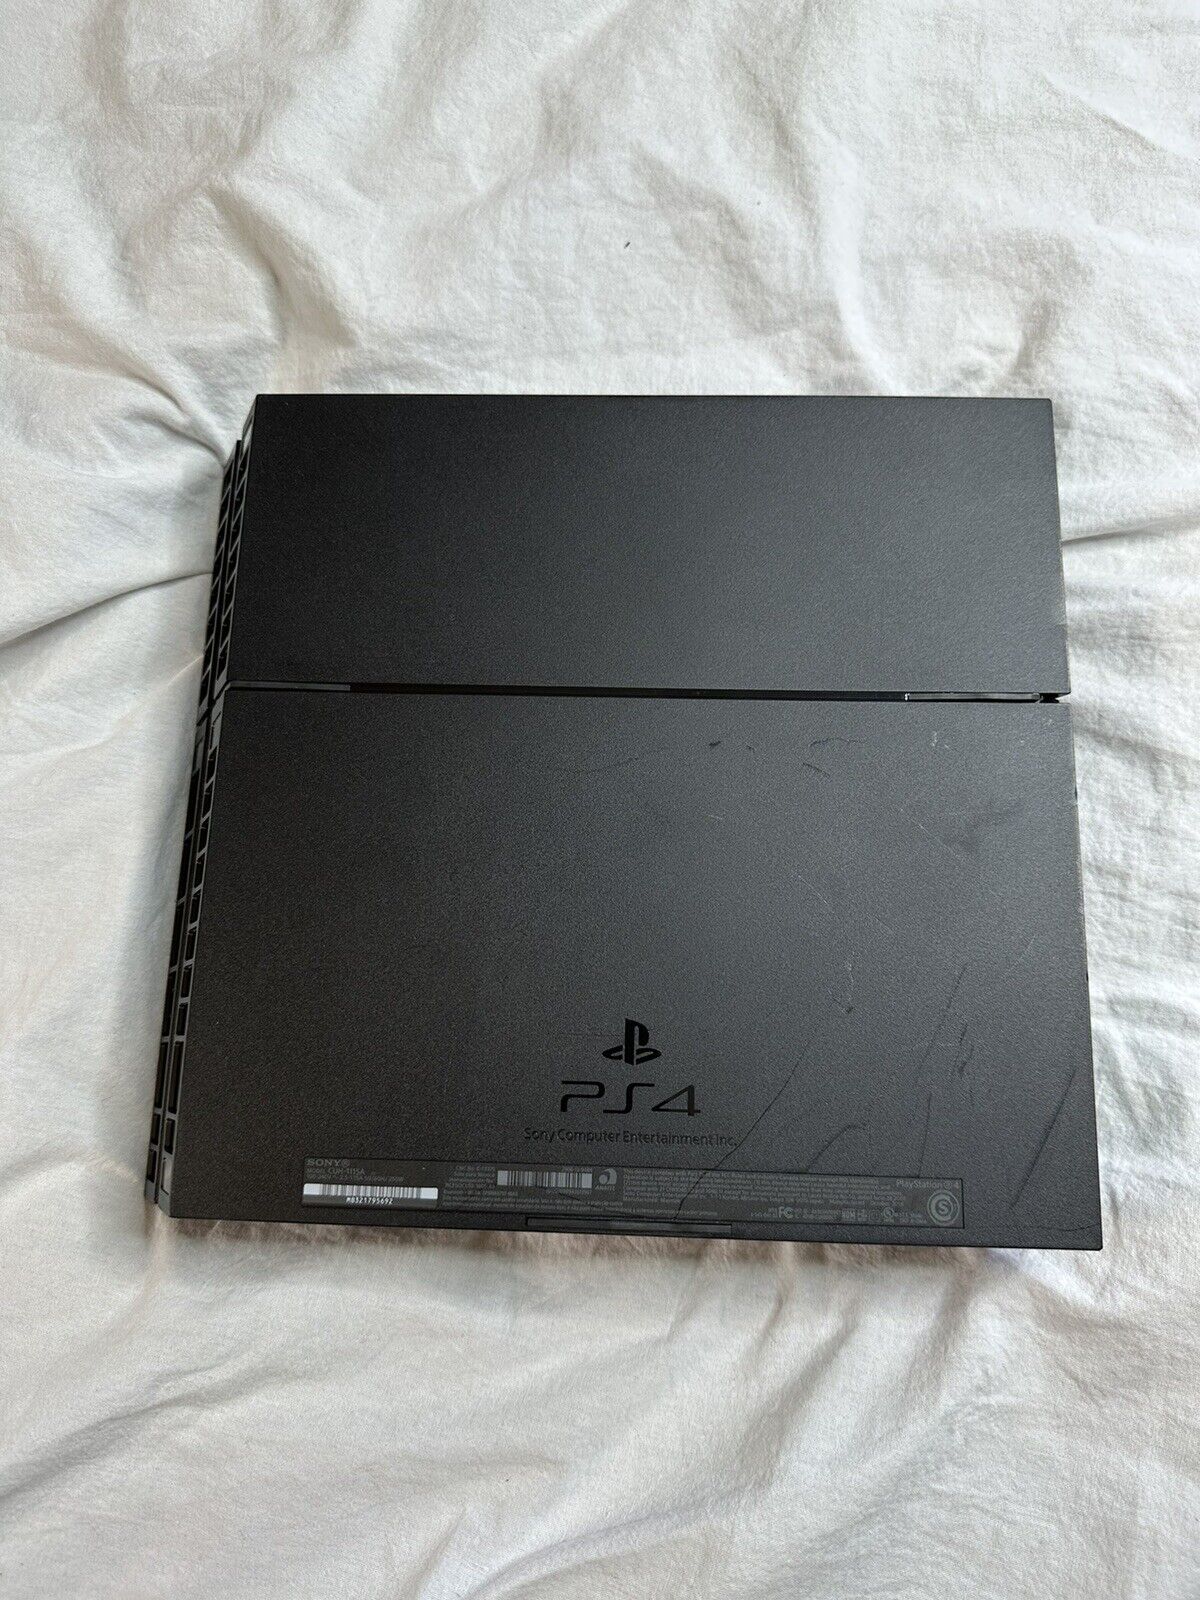 Sony PlayStation 4 500GB Gaming Console - Black (CUH-1115A) Console Only